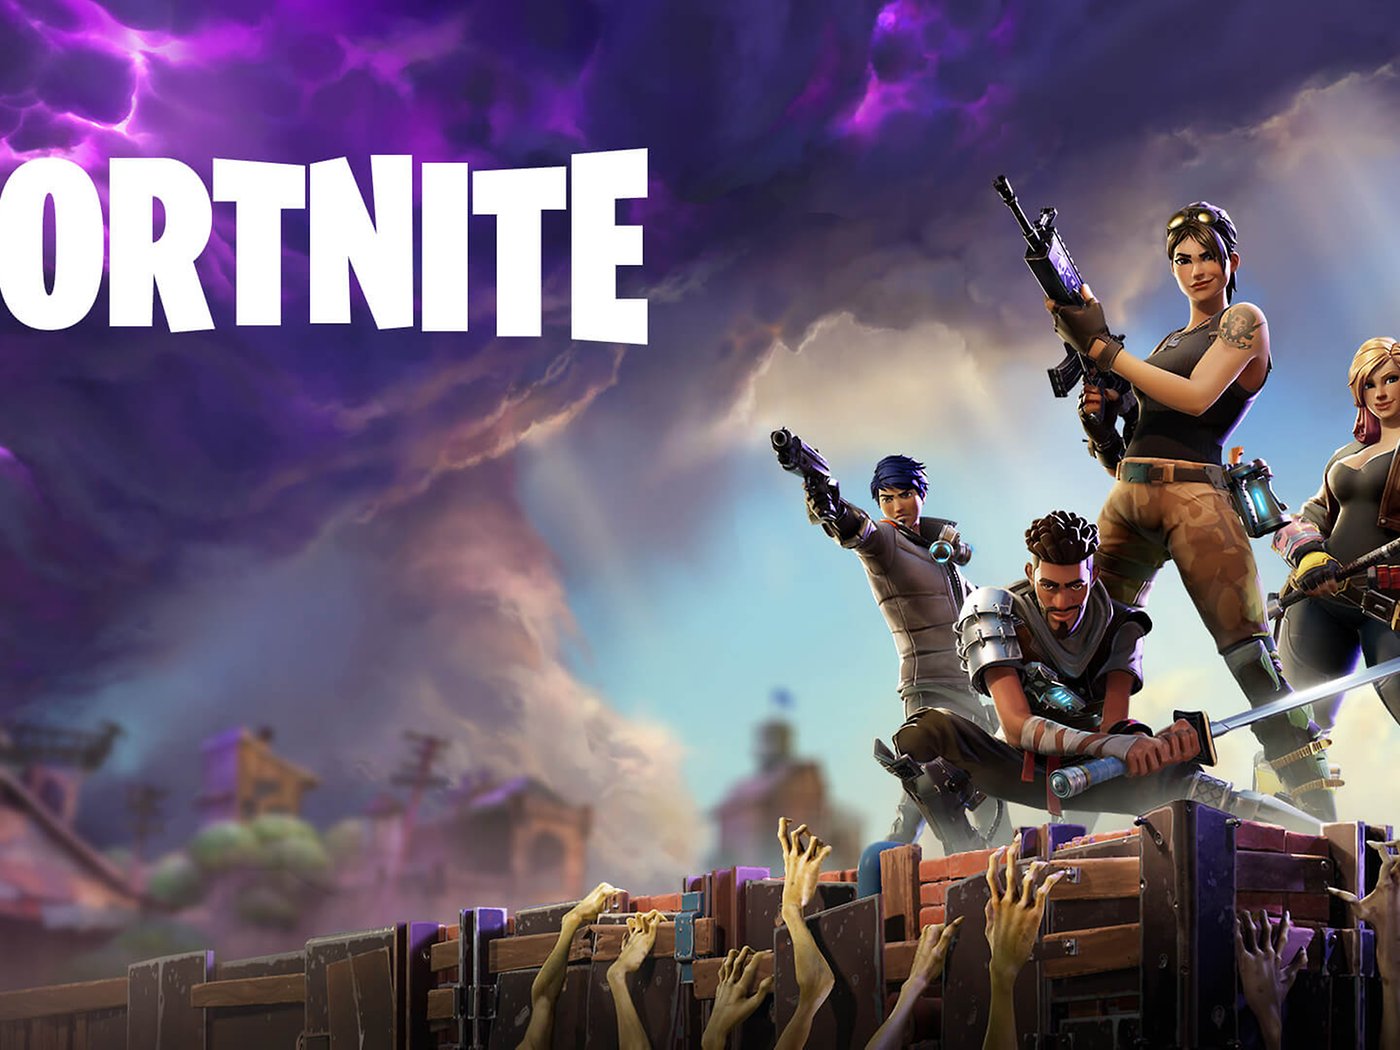 These Are The Minimum Requirements To Play Fortnite On Android - these are the minimum requirements to play fortnite on android androidpit